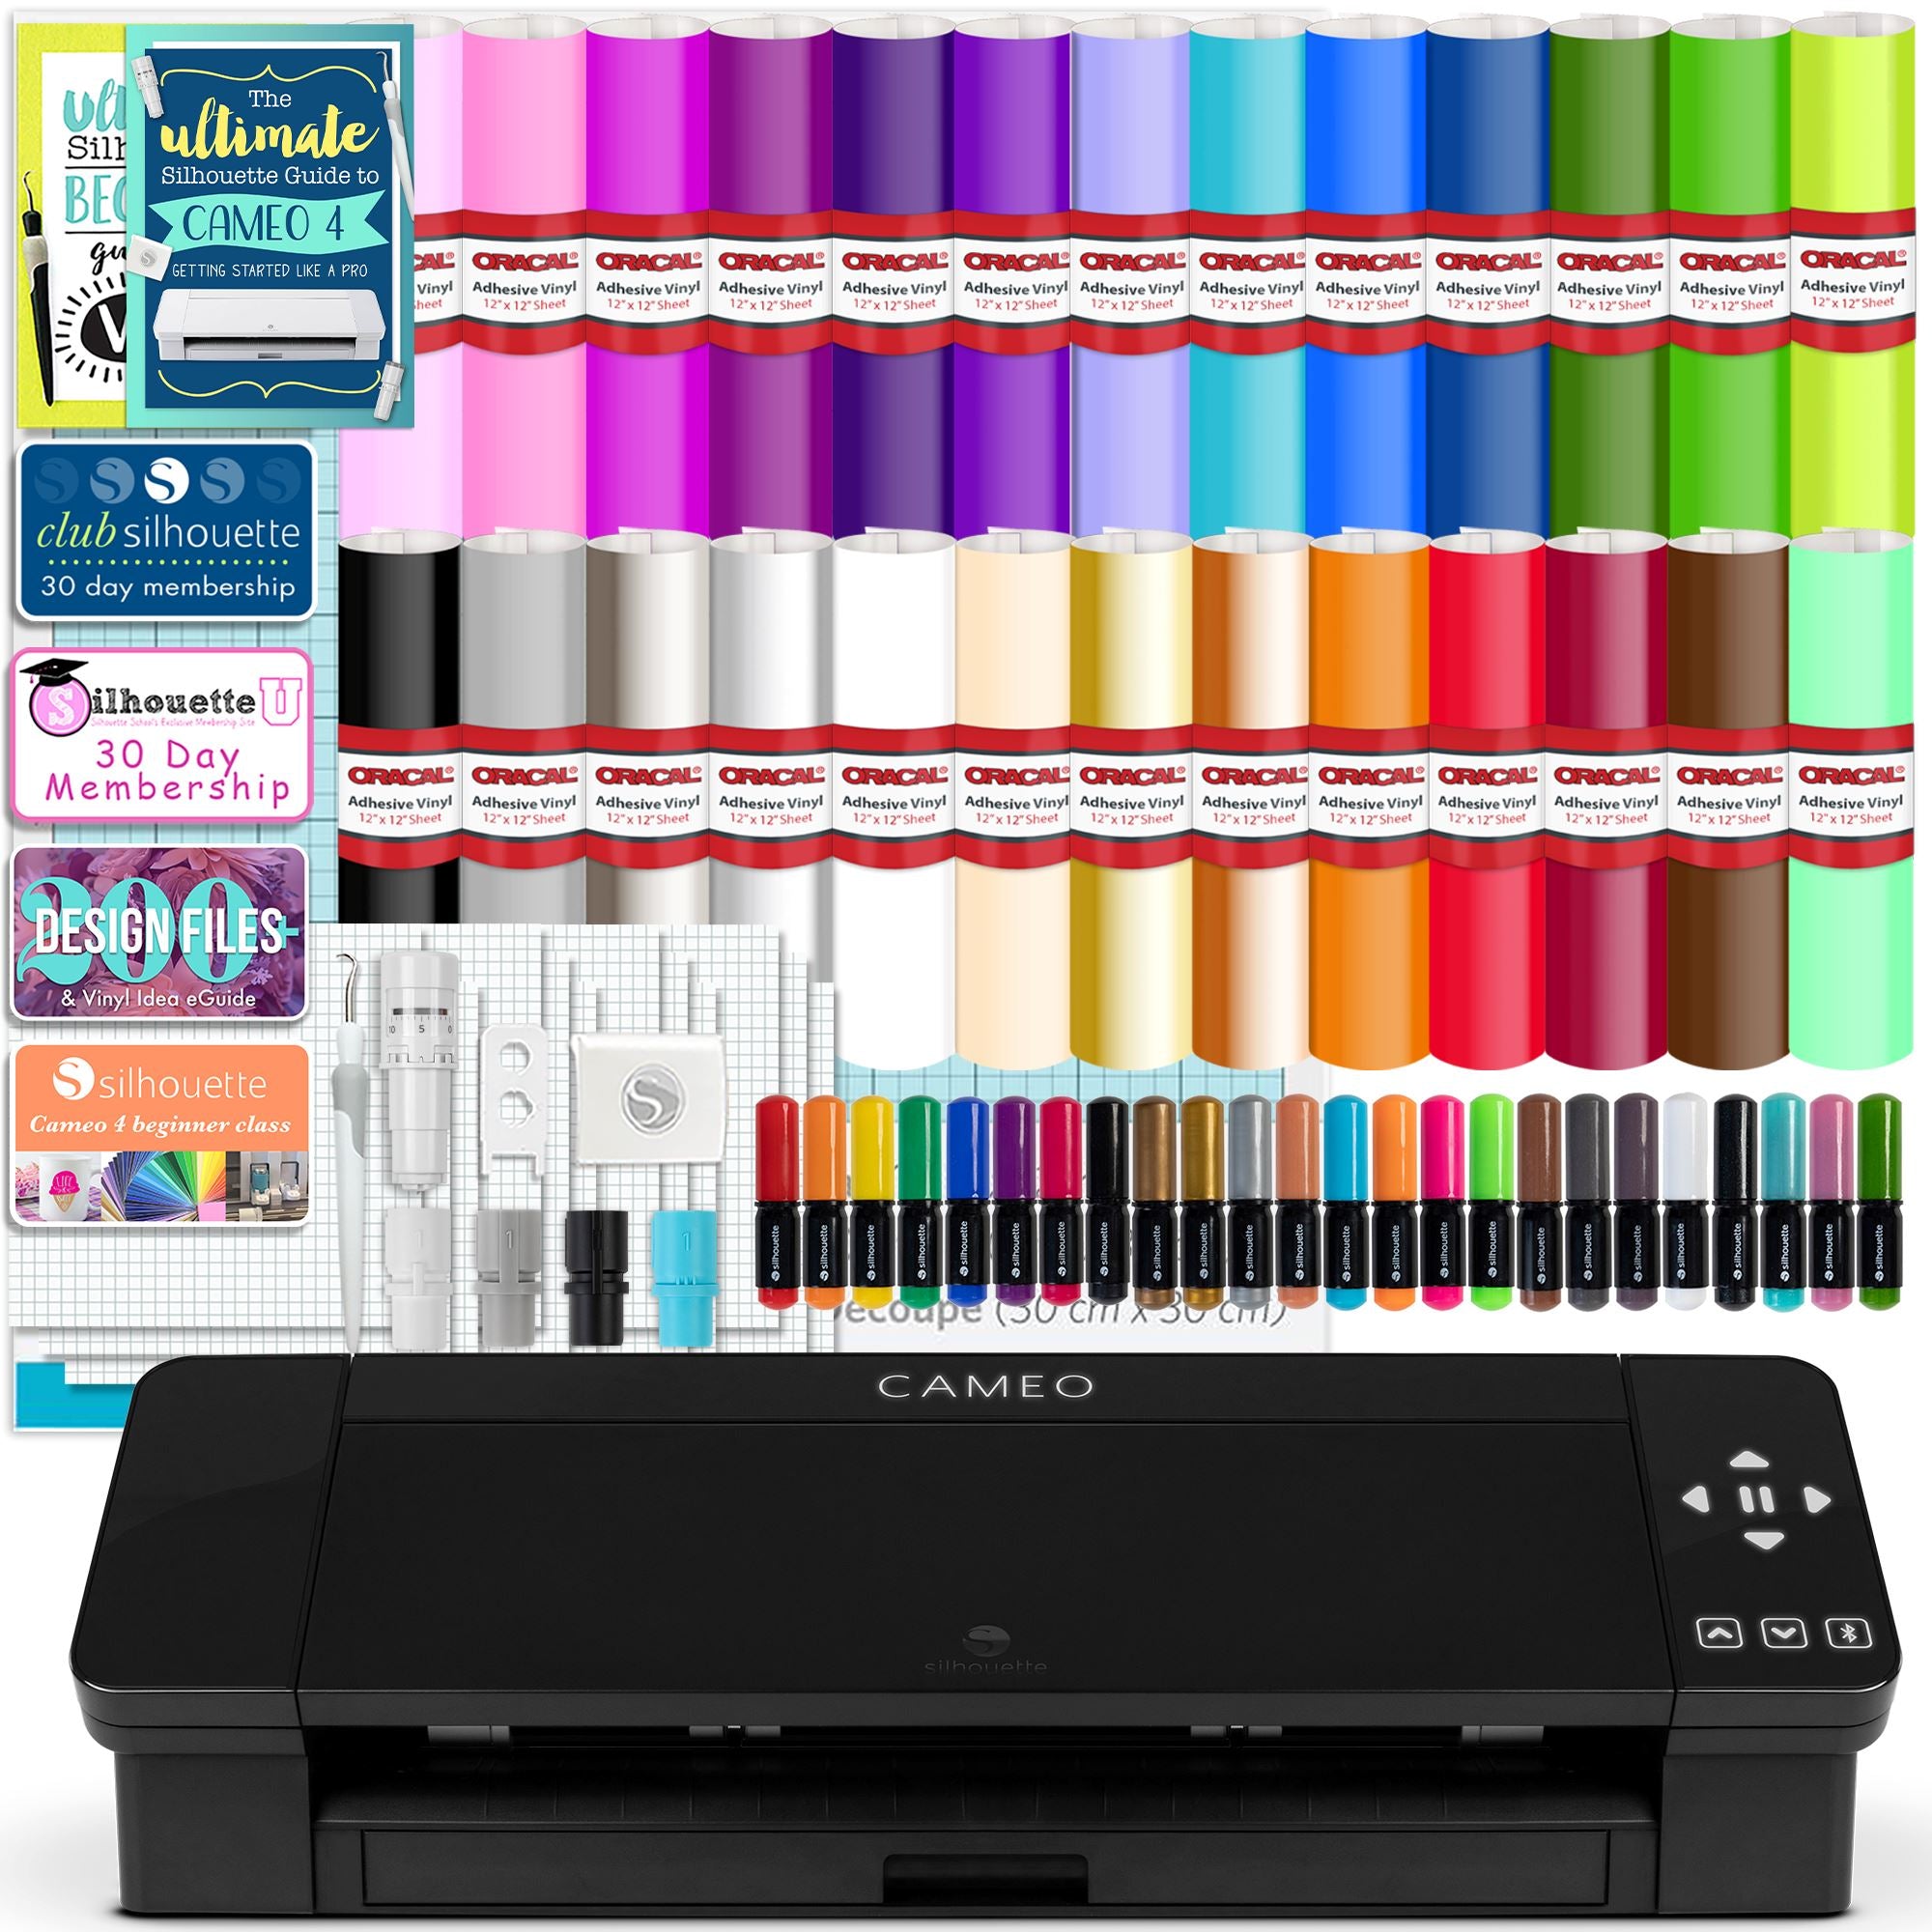 Silhouette Black Cameo 4 w/ 26 Oracal Glossy Sheets, Guides, 24 Sketch  Pens, and More